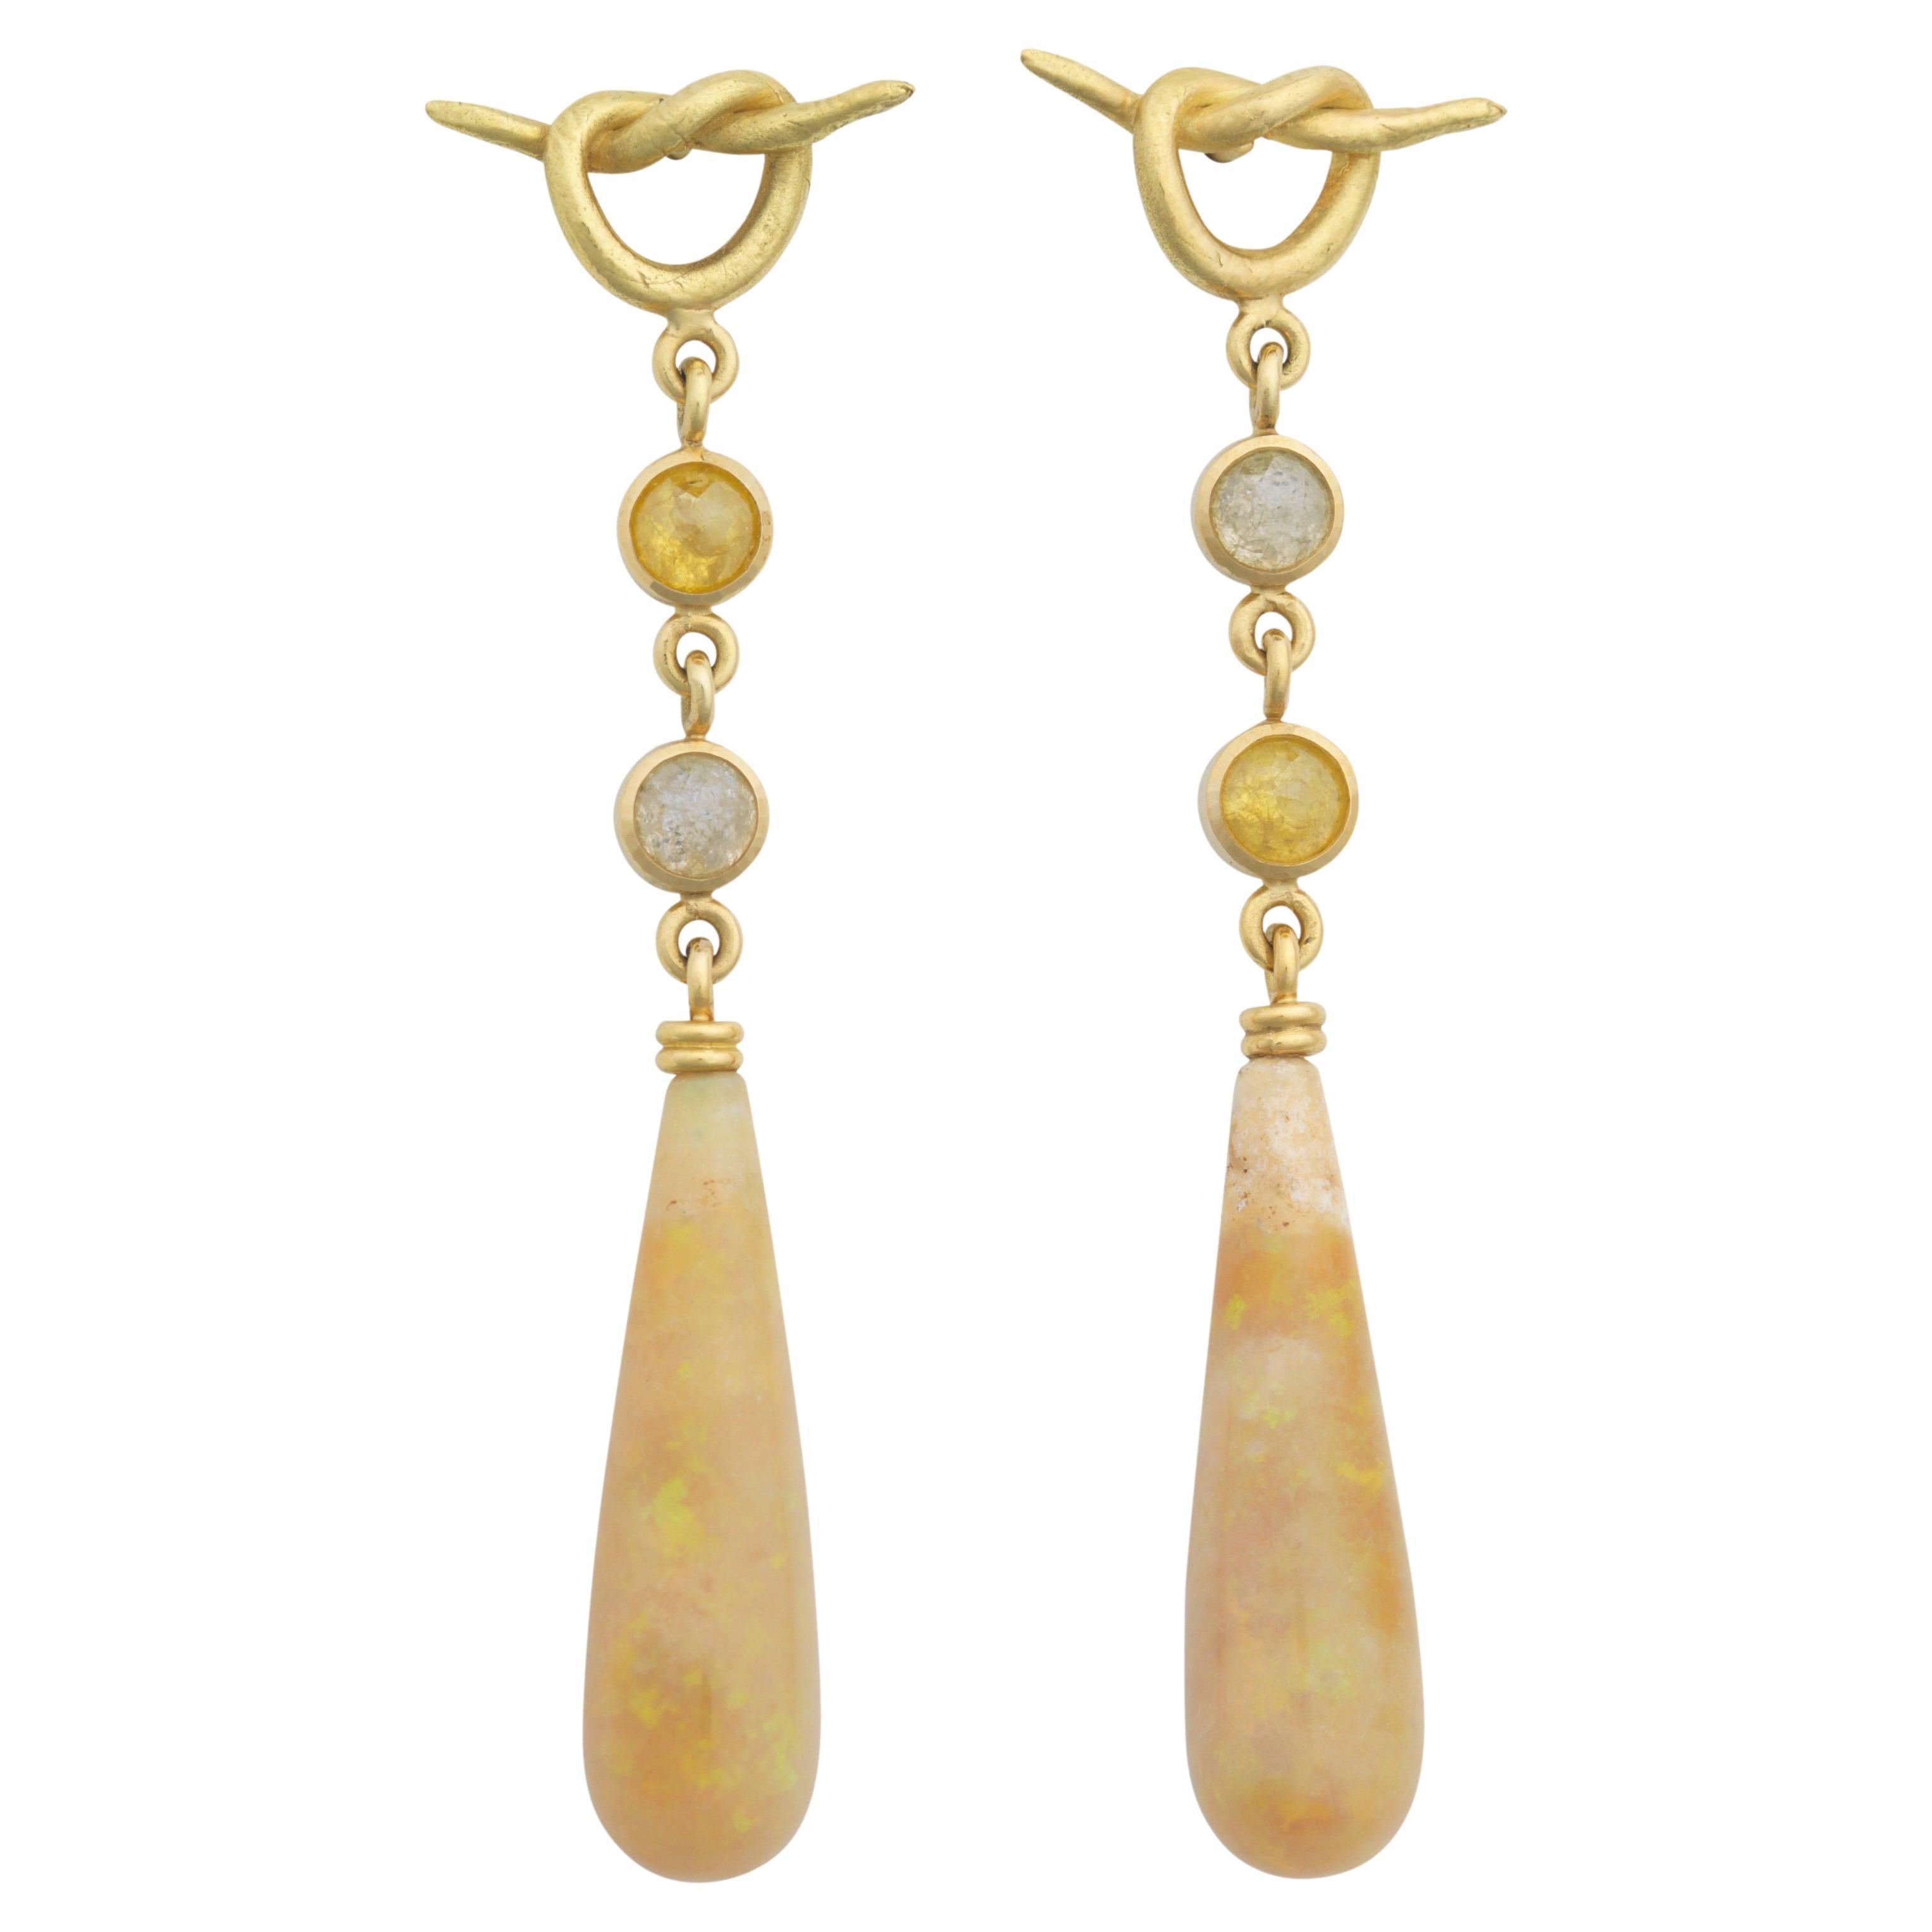 18k Gold Drop "Knot" Earrings with Rose Cut Diamonds and Honey Opal